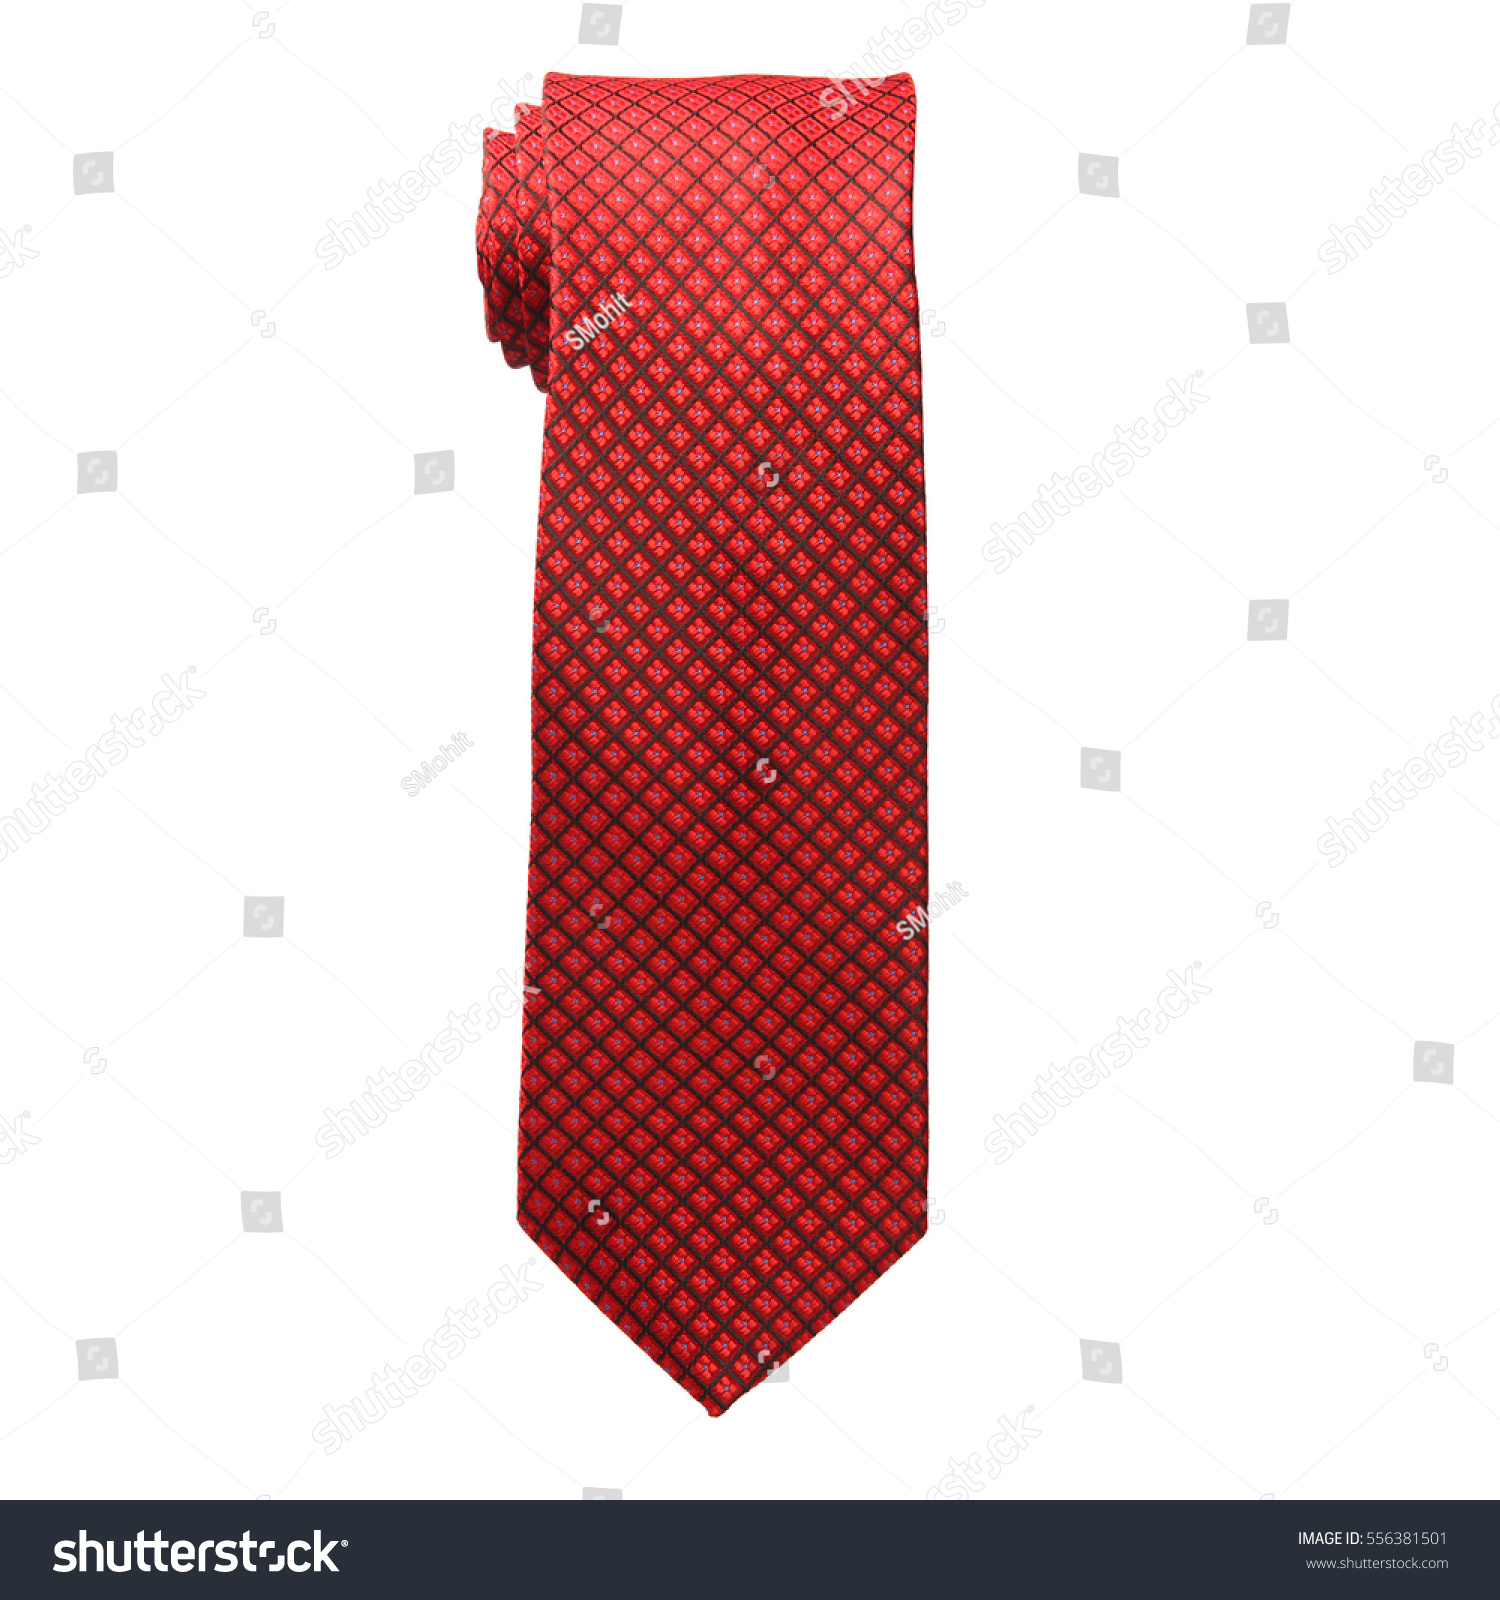 a red neck tie #556381501